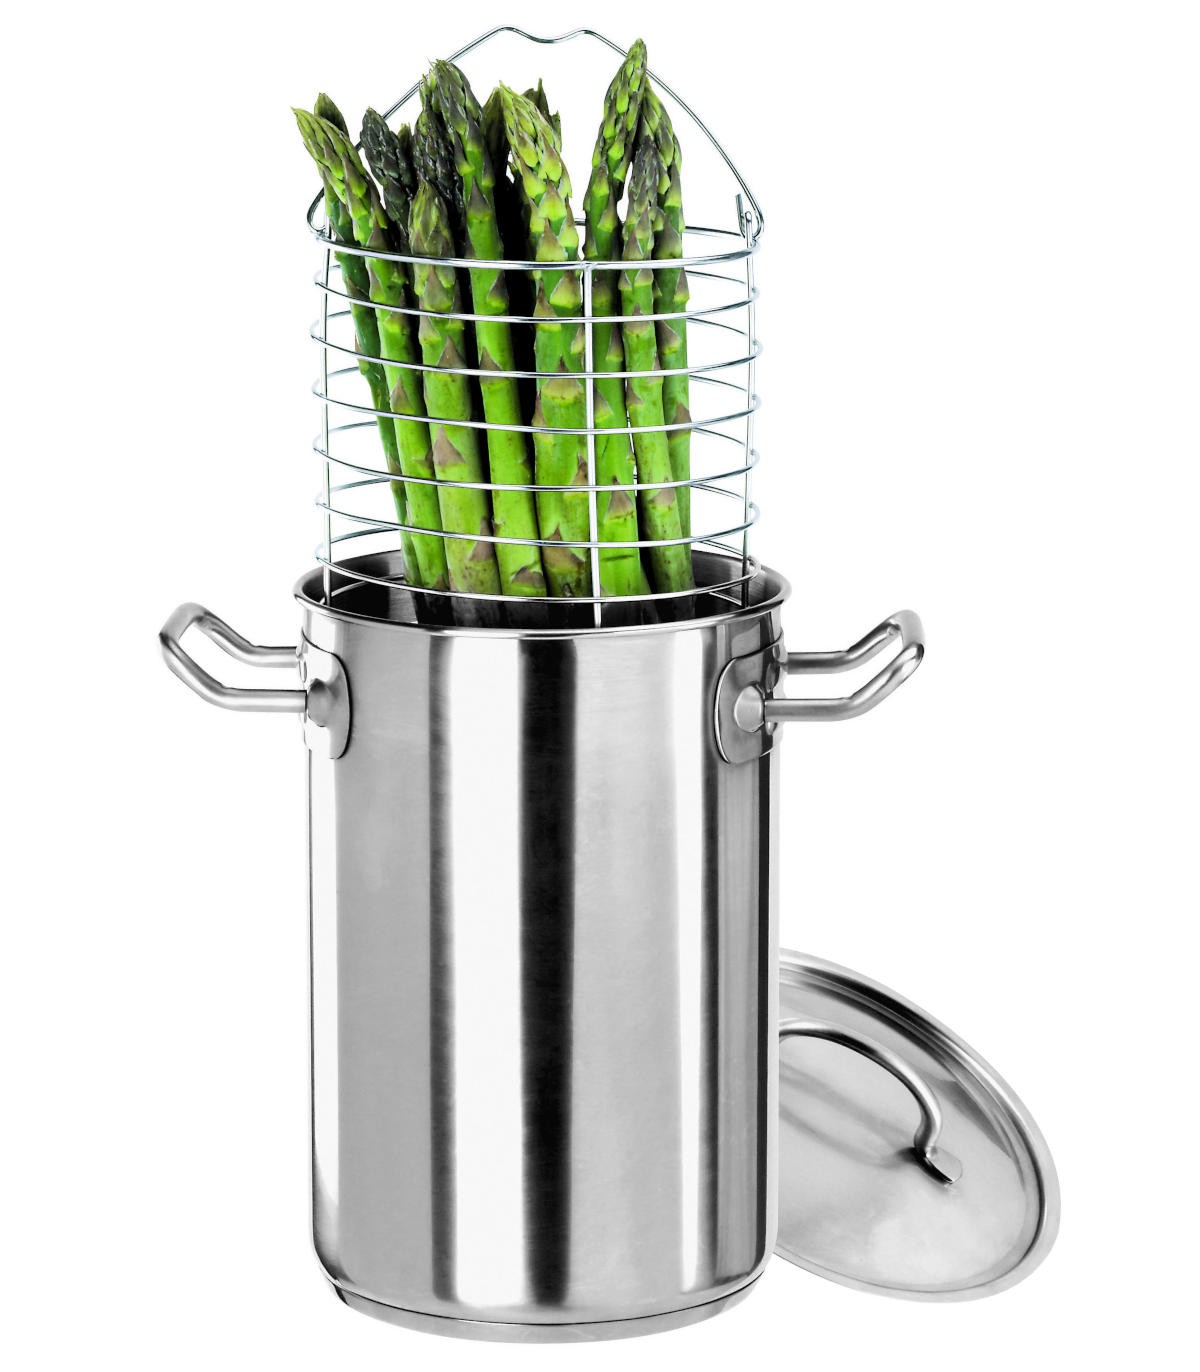 Asparagus Pot Stainless Steel Steamer Cooker with Basket and Lid Pasta 16cm  4L